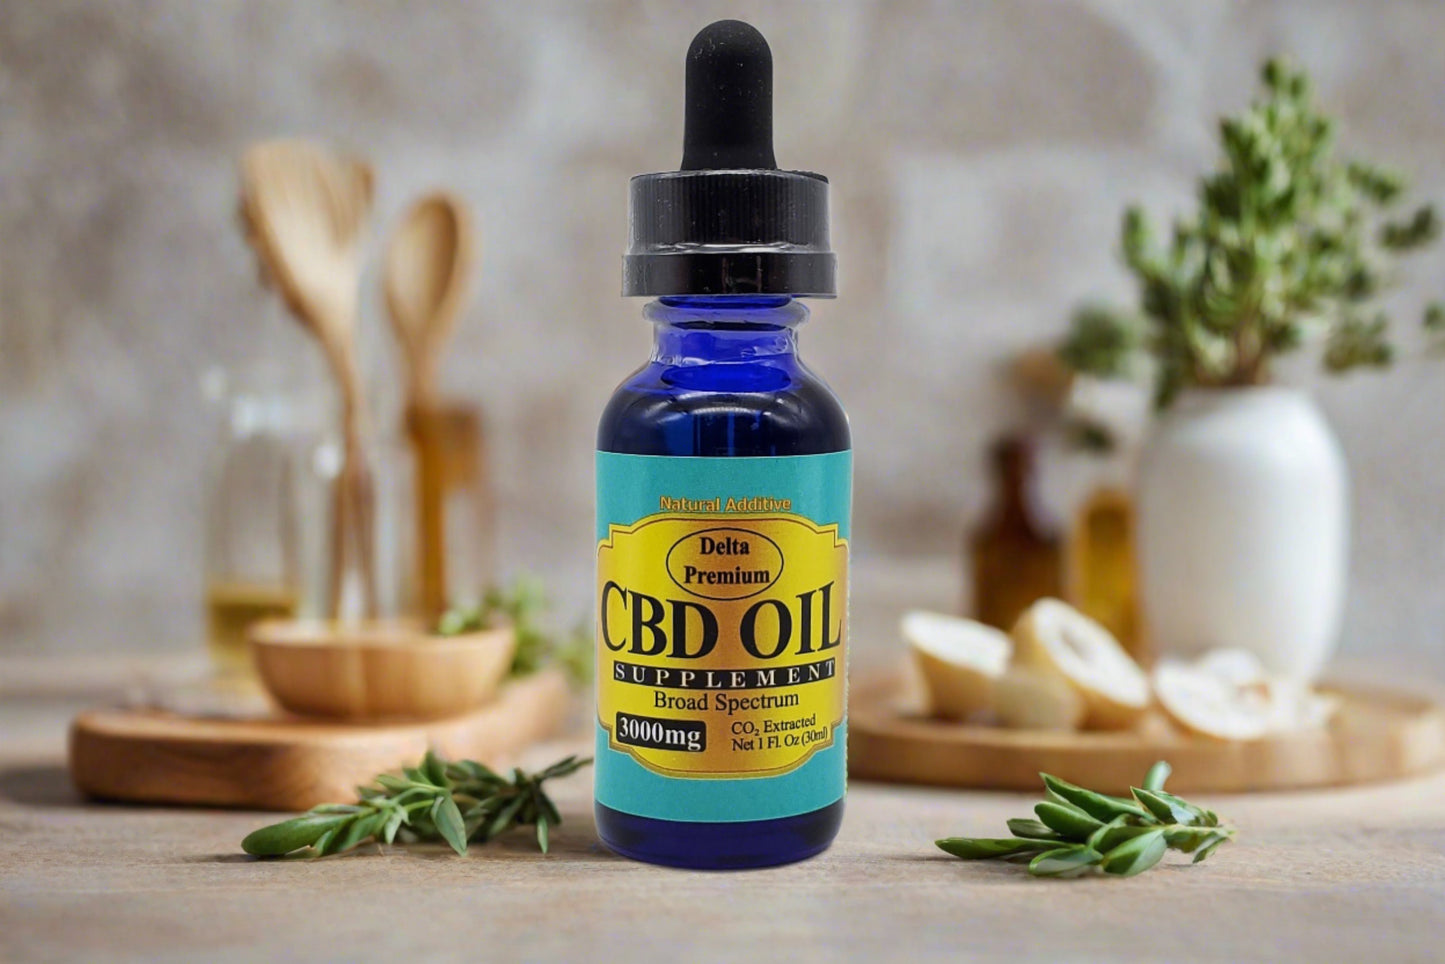 Delta Premium CBD 3000mg Tincture Oil with highest quality cannabinoids and NO THC. Tincture Oil is great for a variety of uses.